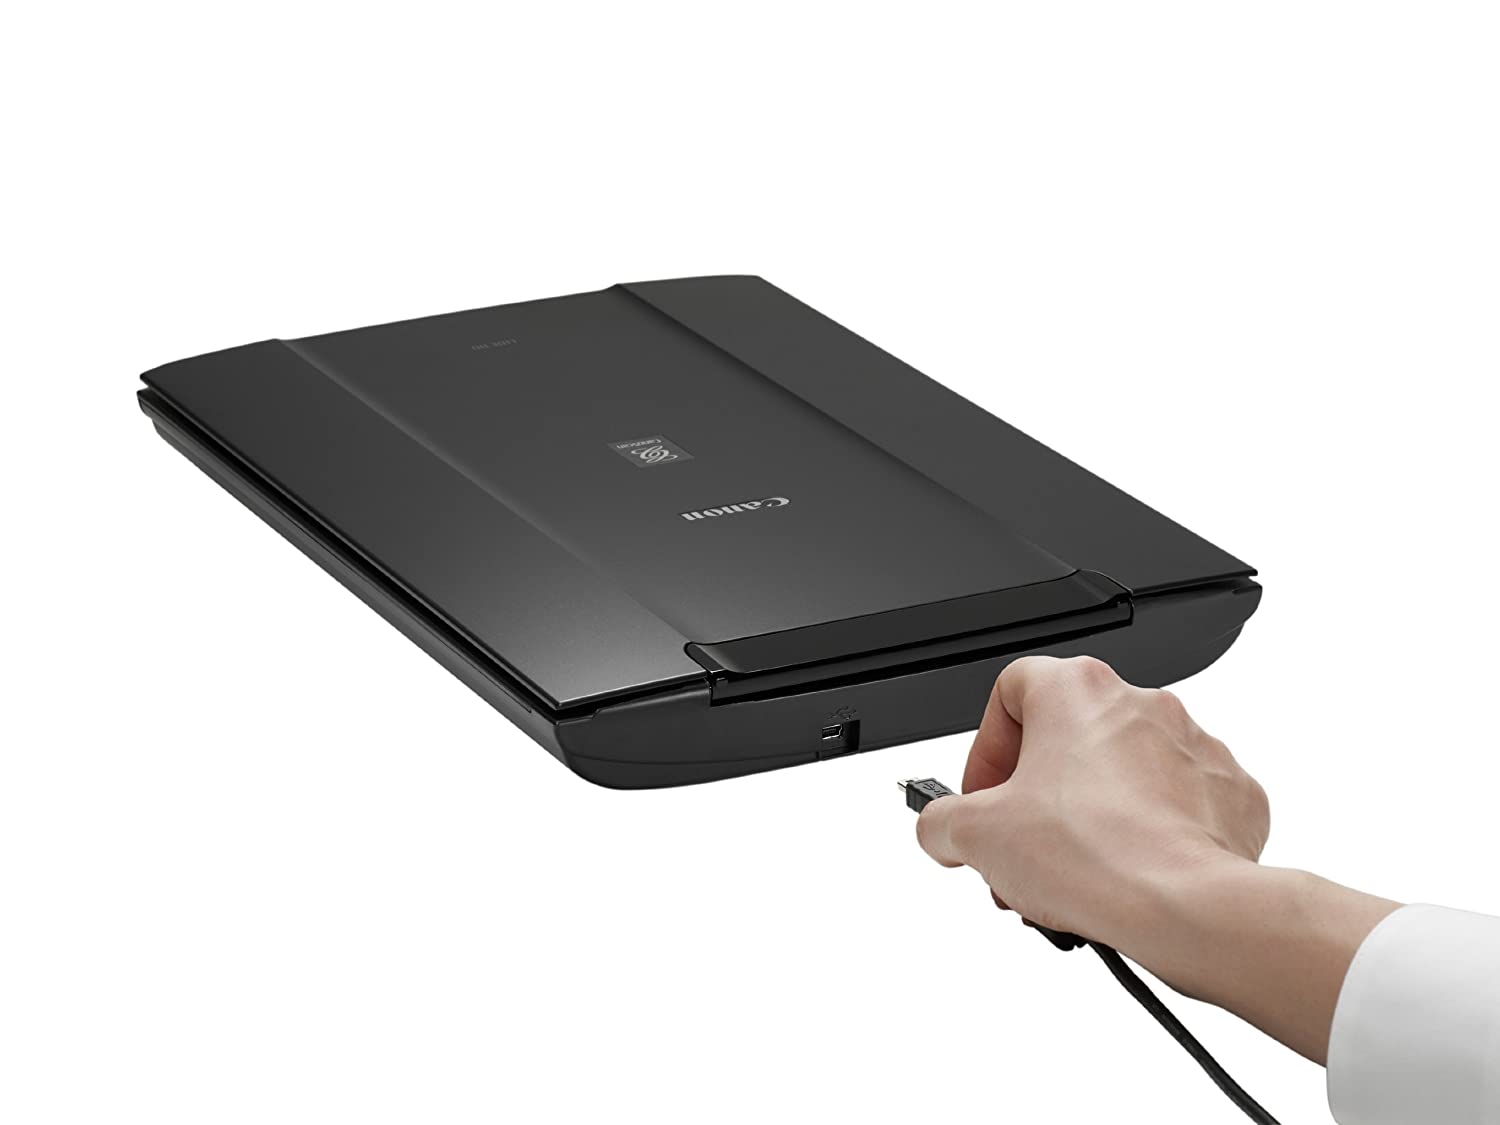 canon lide 90 scanner driver